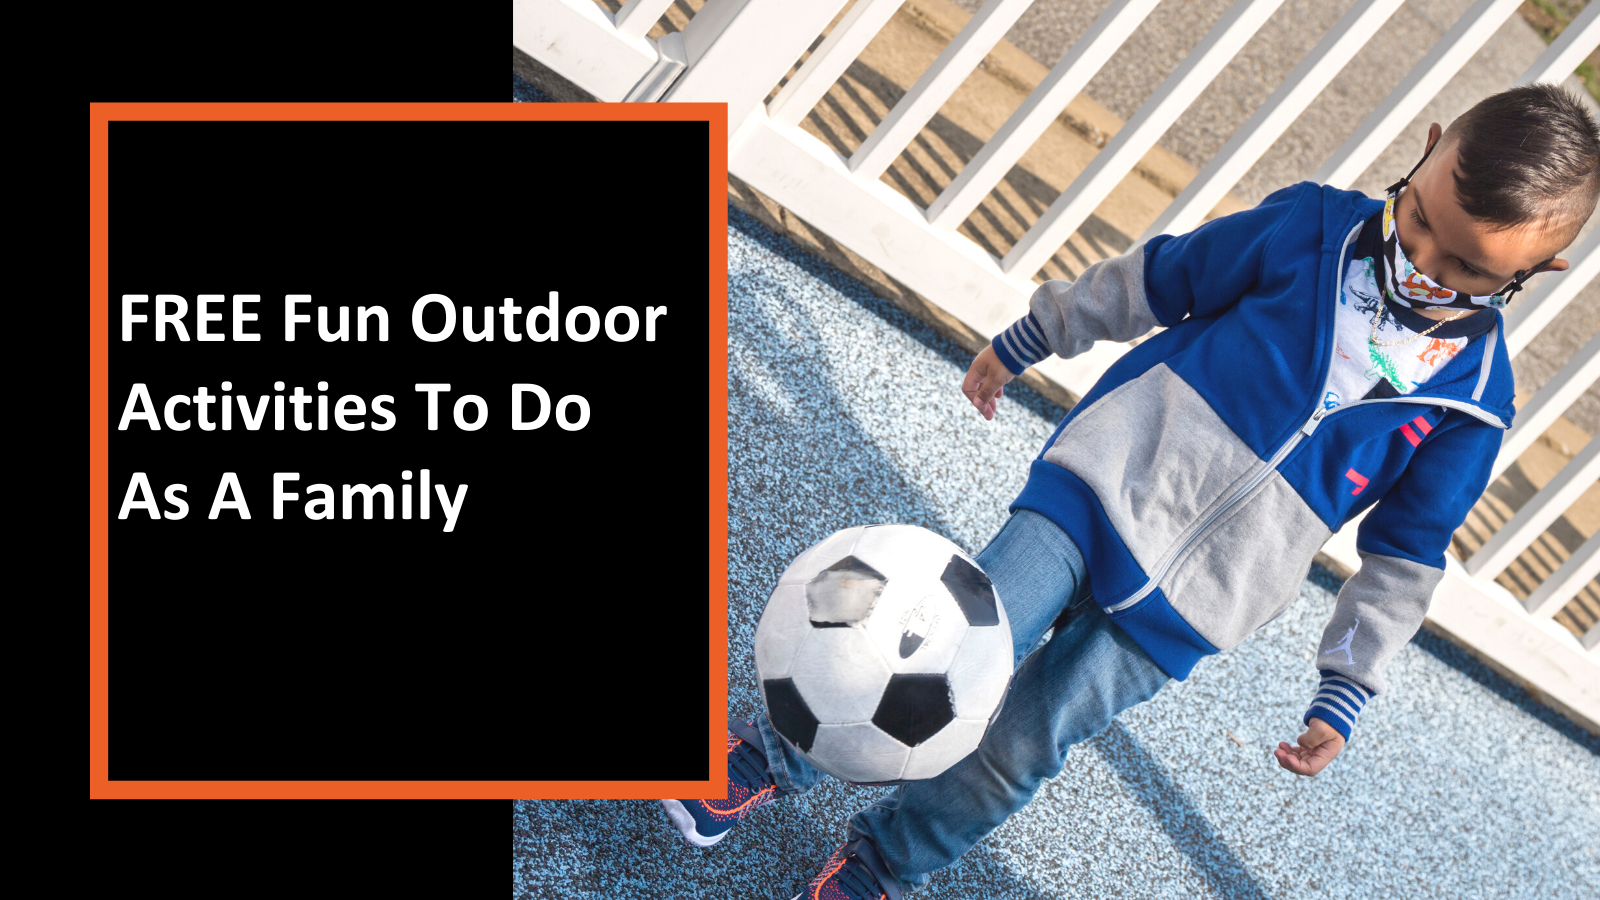 10 FREE Fun Outdoor Activities To Do With Kids